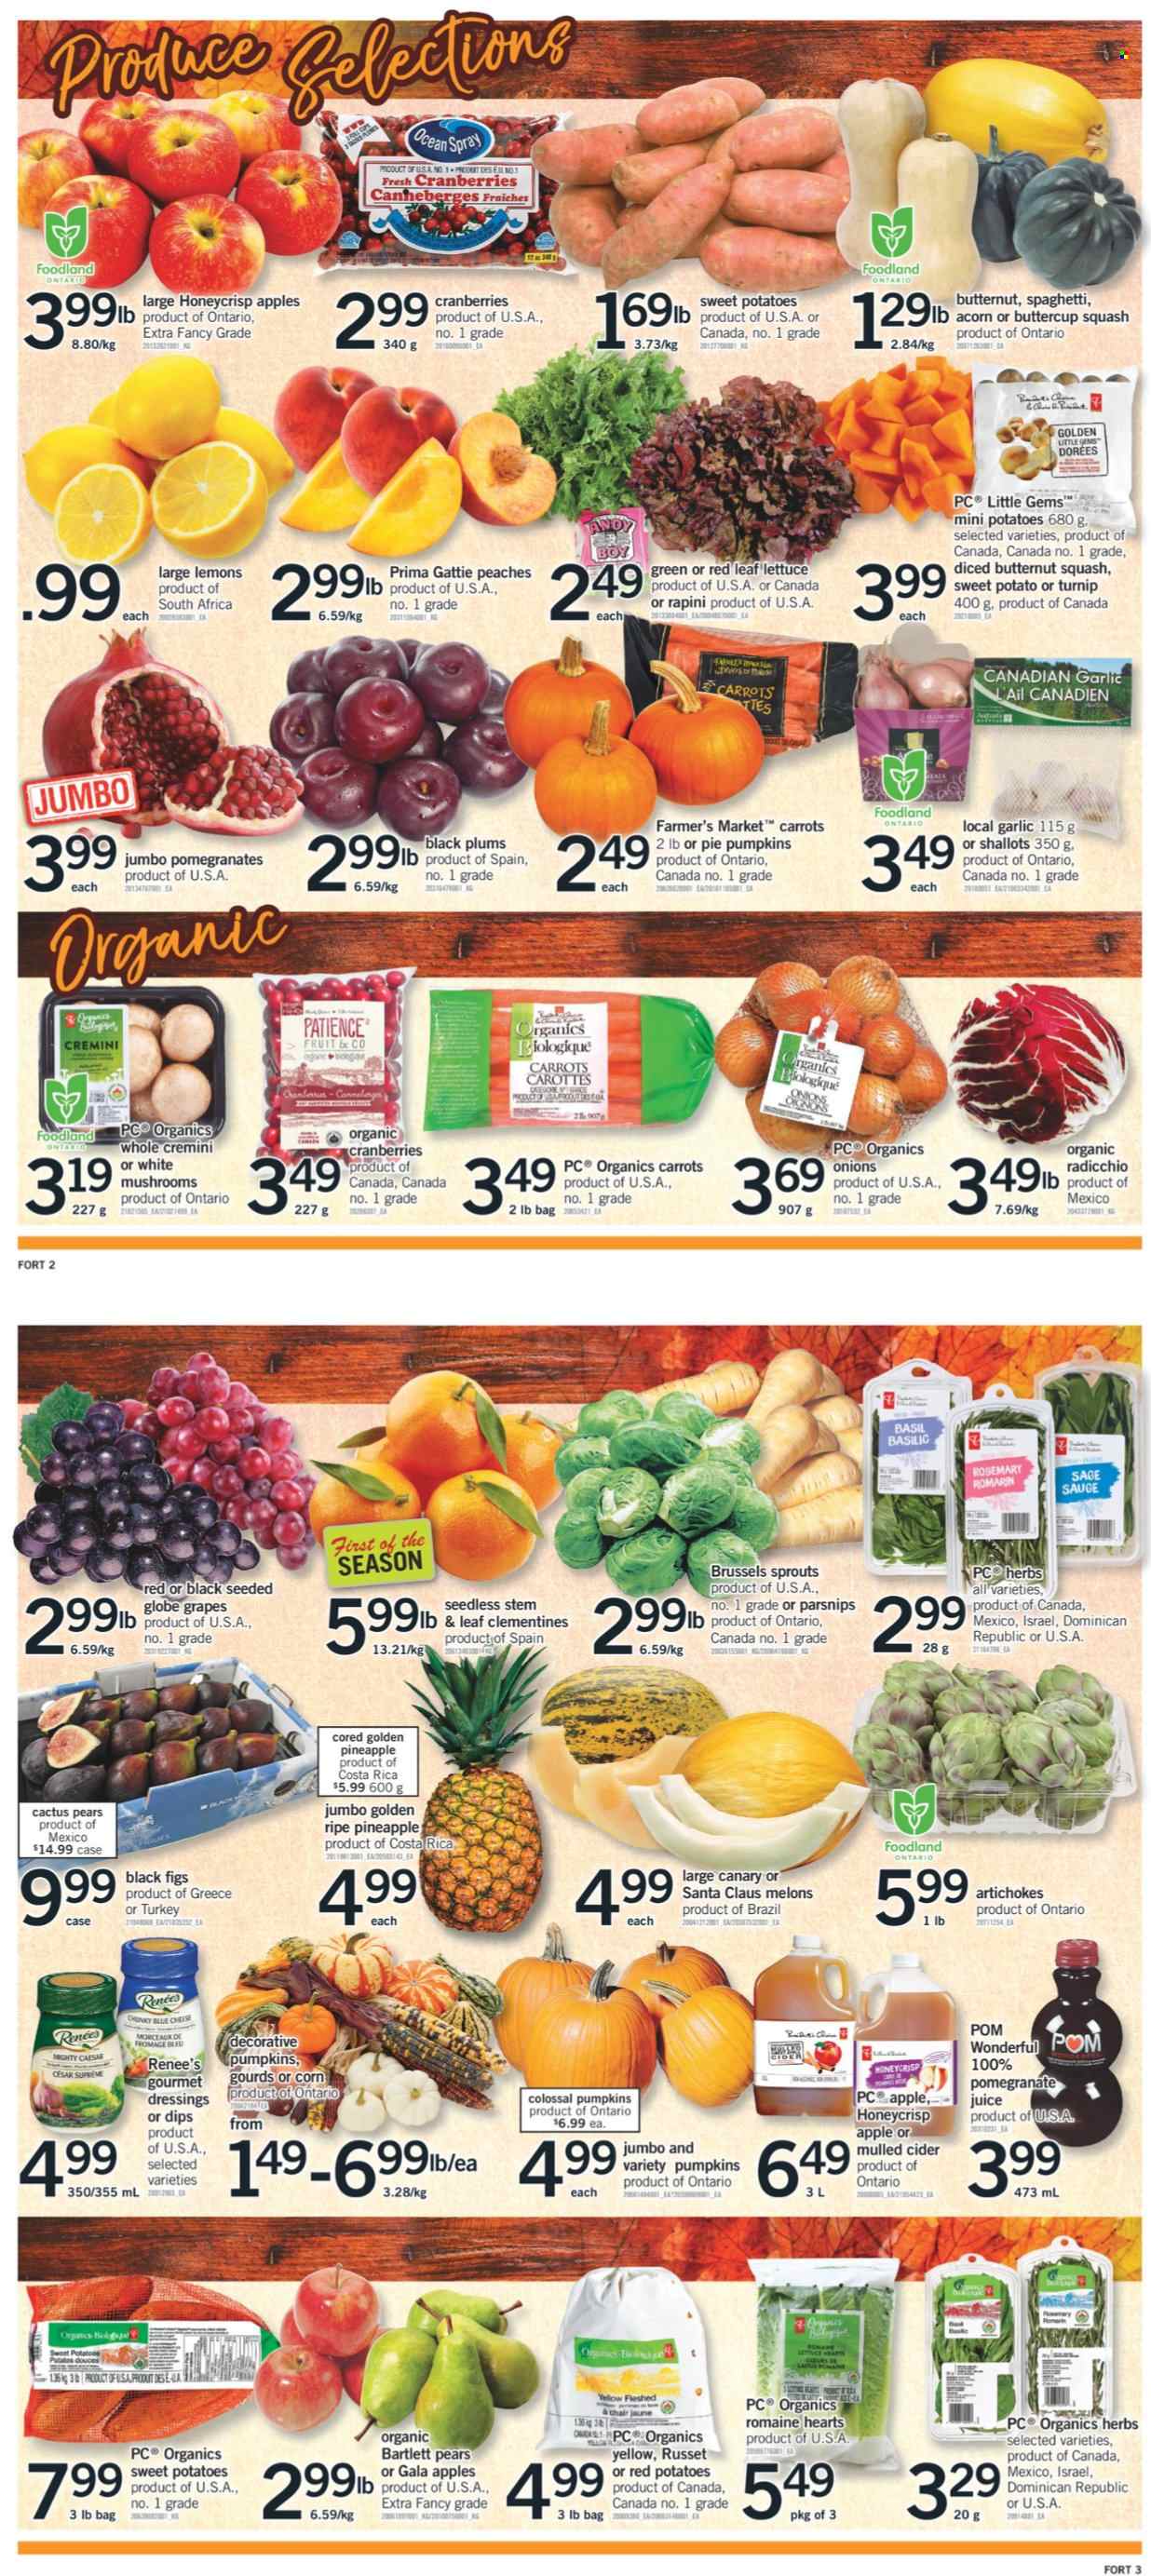 thumbnail - Fortinos Flyer - October 07, 2021 - October 10, 2021 - Sales products - pie, artichoke, butternut squash, carrots, corn, garlic, russet potatoes, shallots, sweet potato, potatoes, pumpkin, parsnips, onion, lettuce, brussel sprouts, red potatoes, apples, Bartlett pears, clementines, figs, Gala, grapes, pineapple, plums, pears, melons, pomegranate, lemons, black plums, peaches, spaghetti, cheese, Santa, cranberries, esponja, rosemary, herbs, juice, cider, chair, Santa Claus, cactus, radicchio. Page 3.